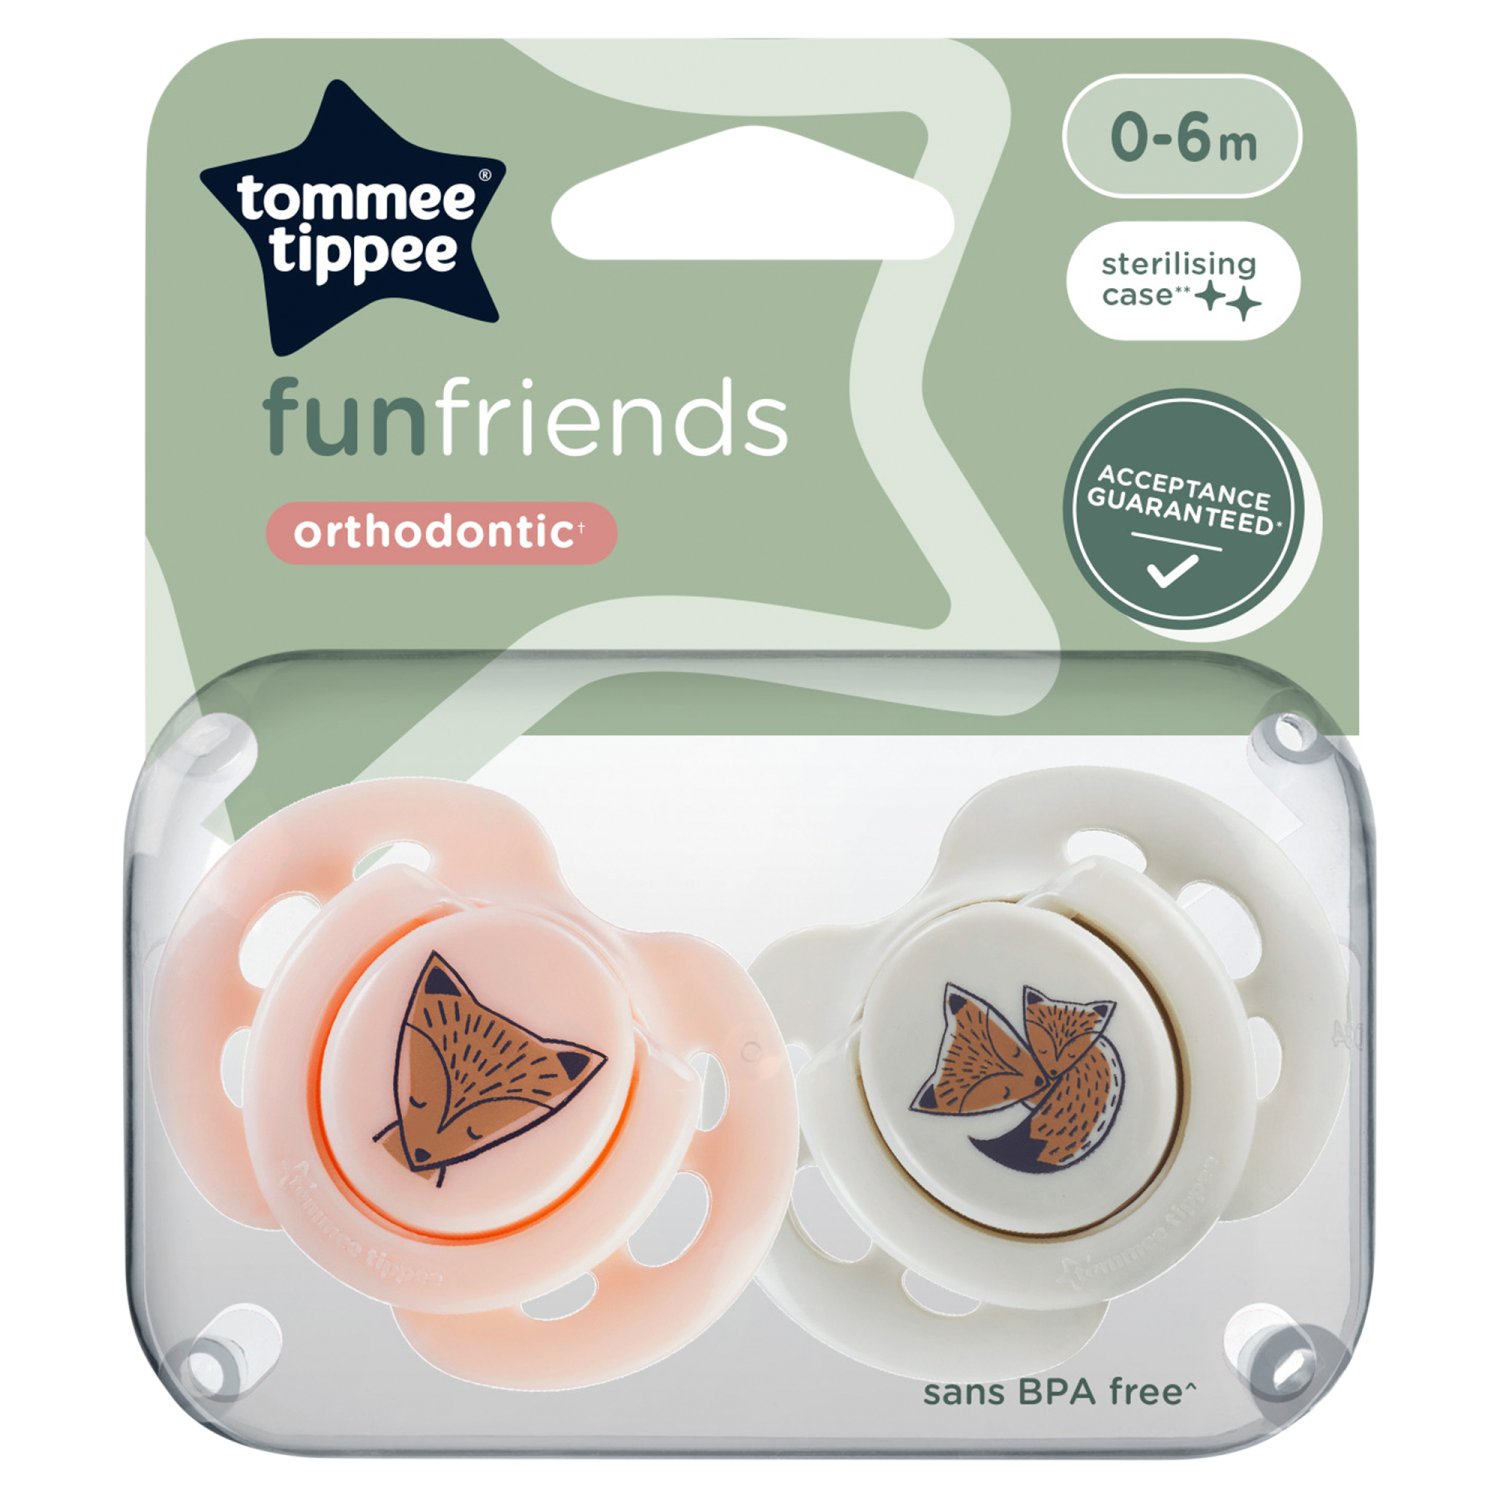 Tommee Tippee Orthodontic Soothers 0-6 Months (2 Piece)